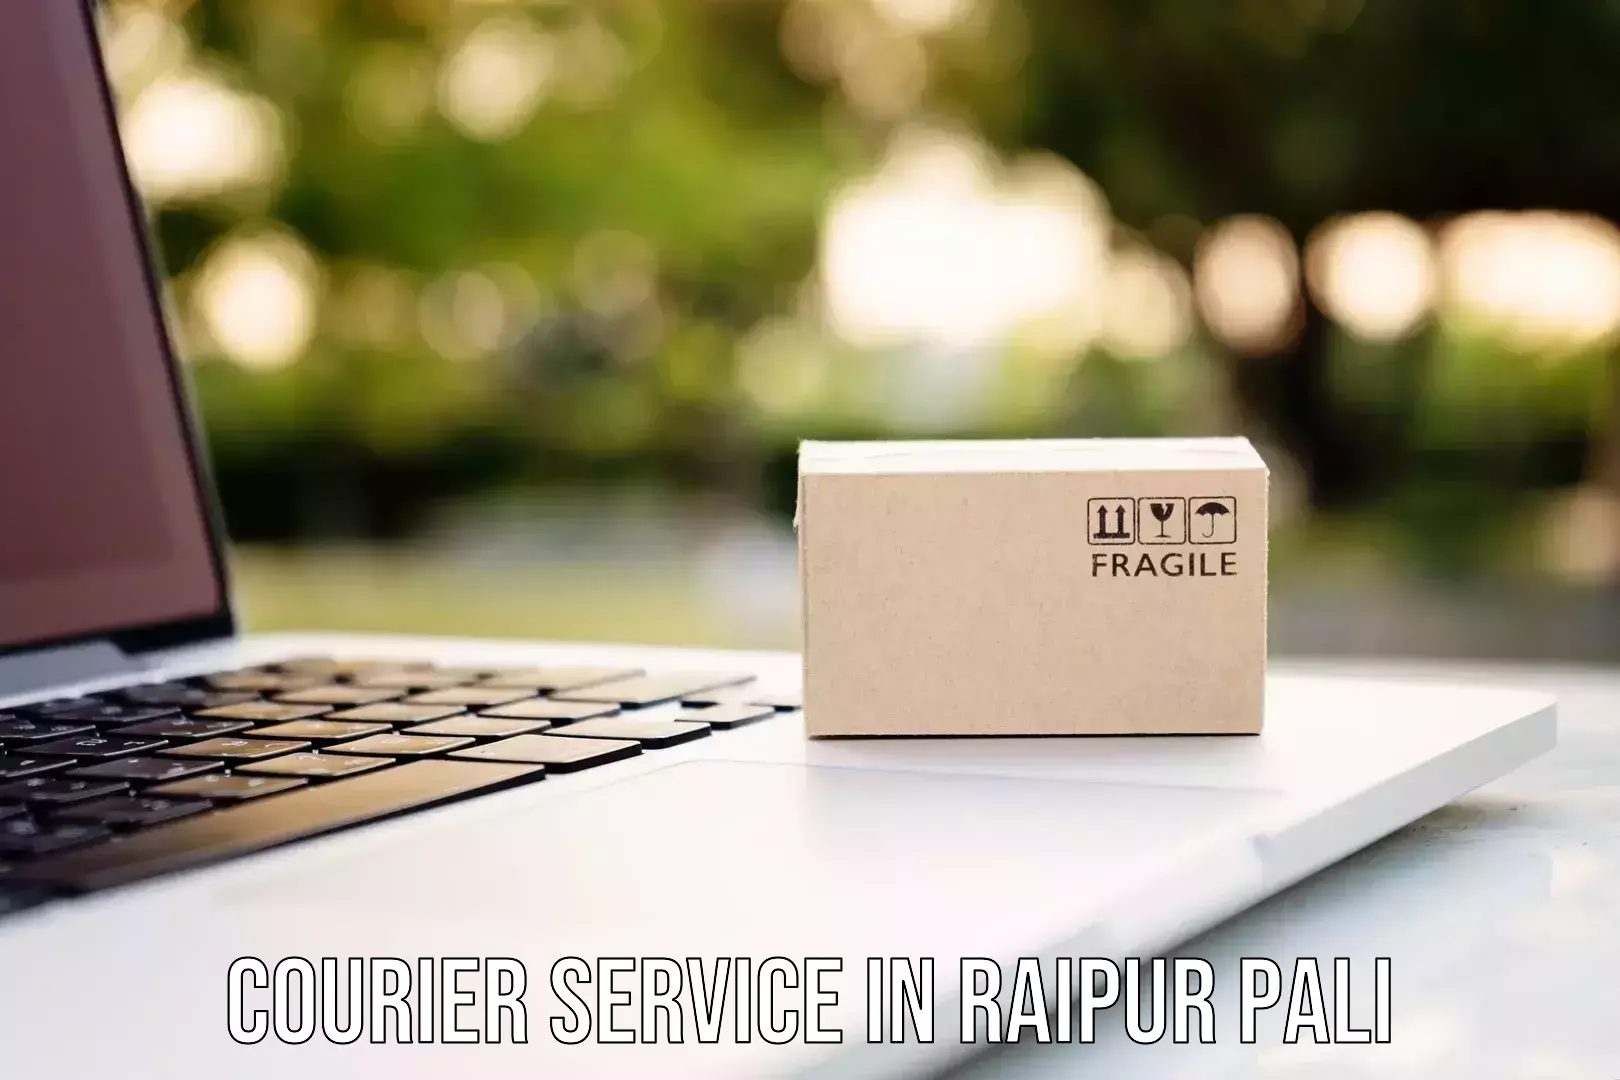 Enhanced tracking features in Raipur Pali